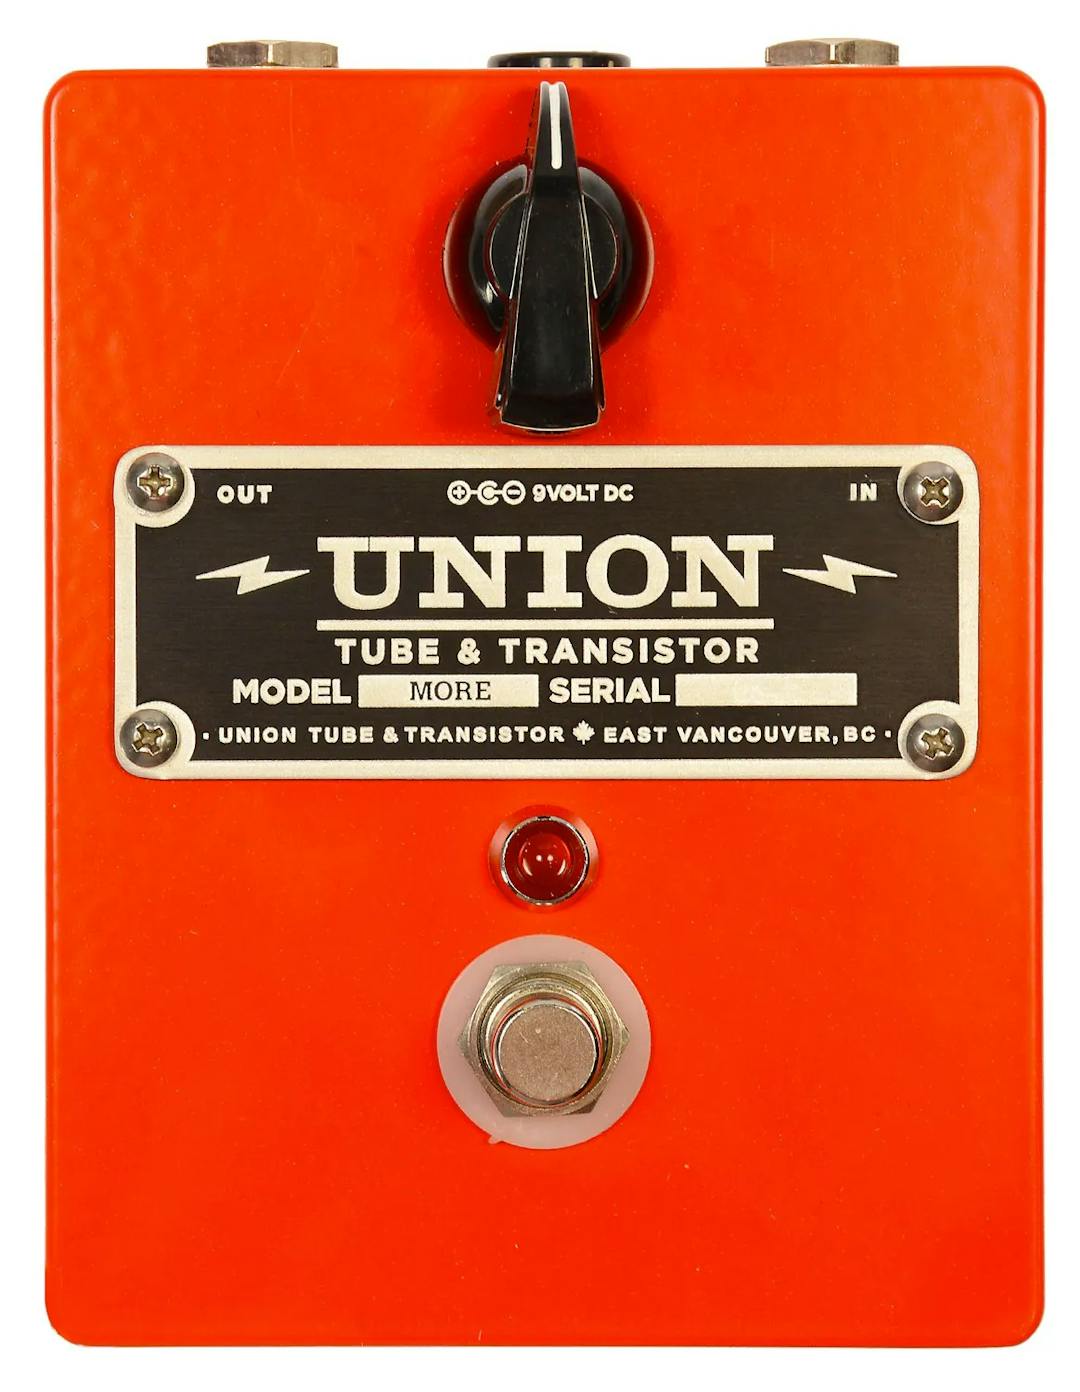 More Guitar Pedal By Union Tube & Transistor